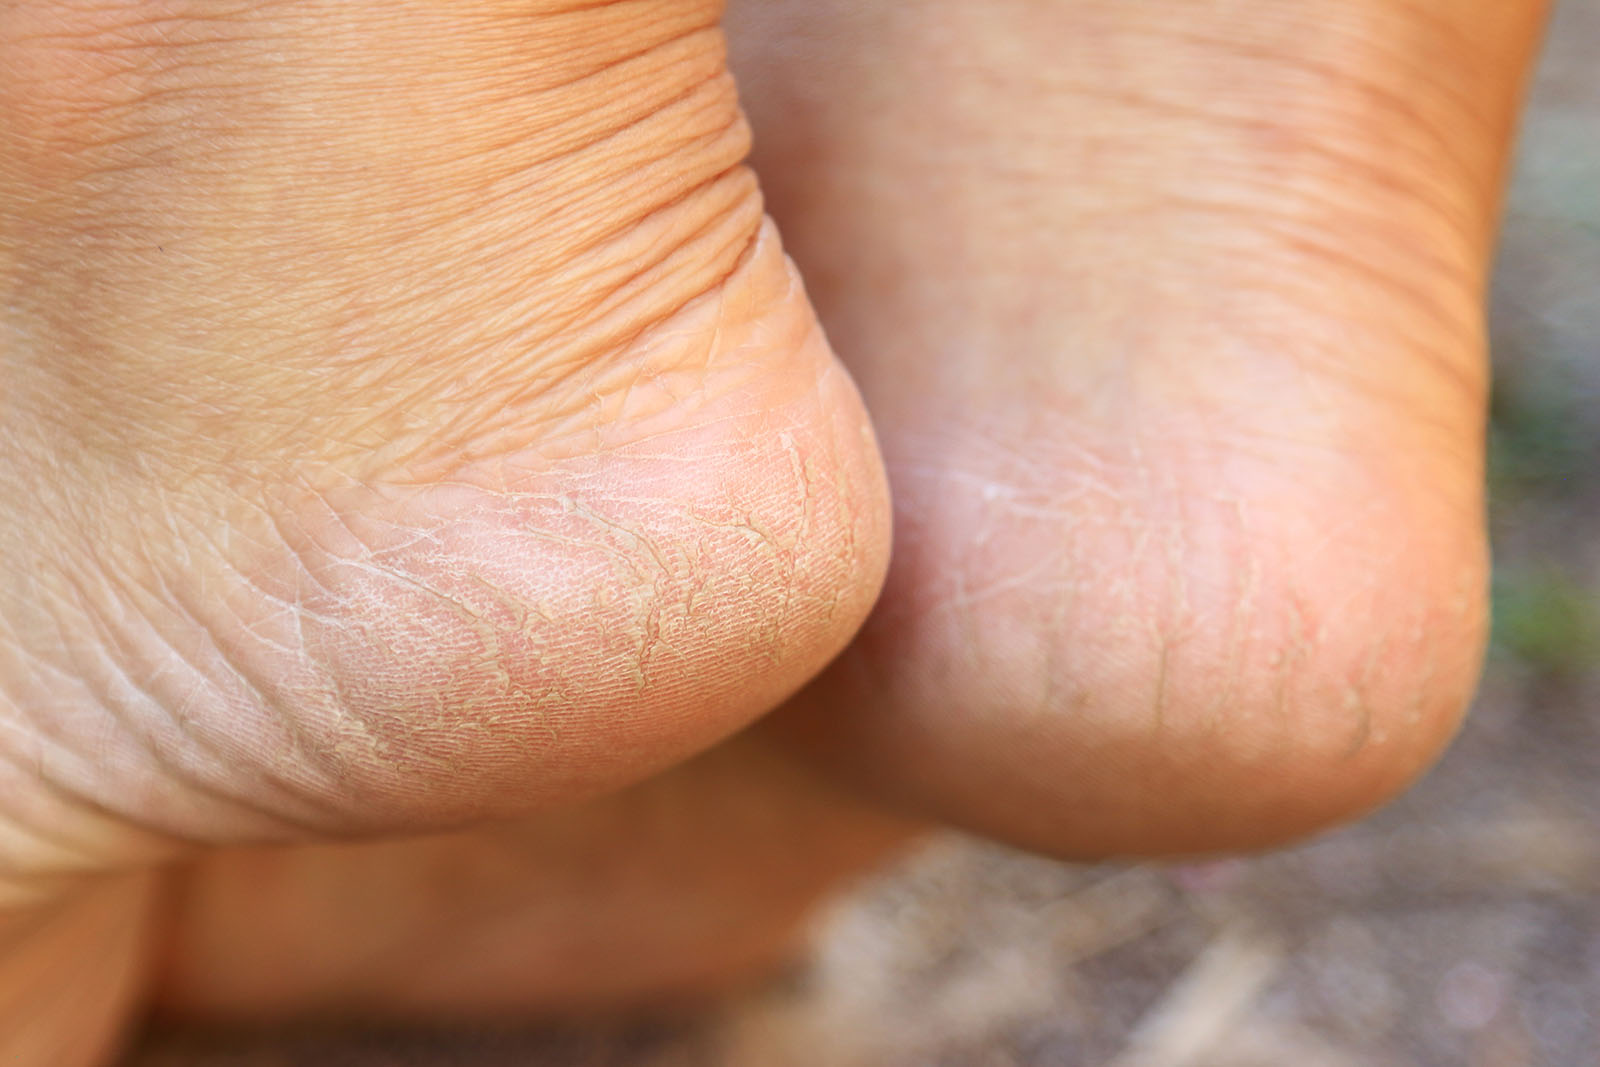 A Podiatrists Recommendations How To Get Rid Of Dry Cracked Feet Hyprocure The Proven